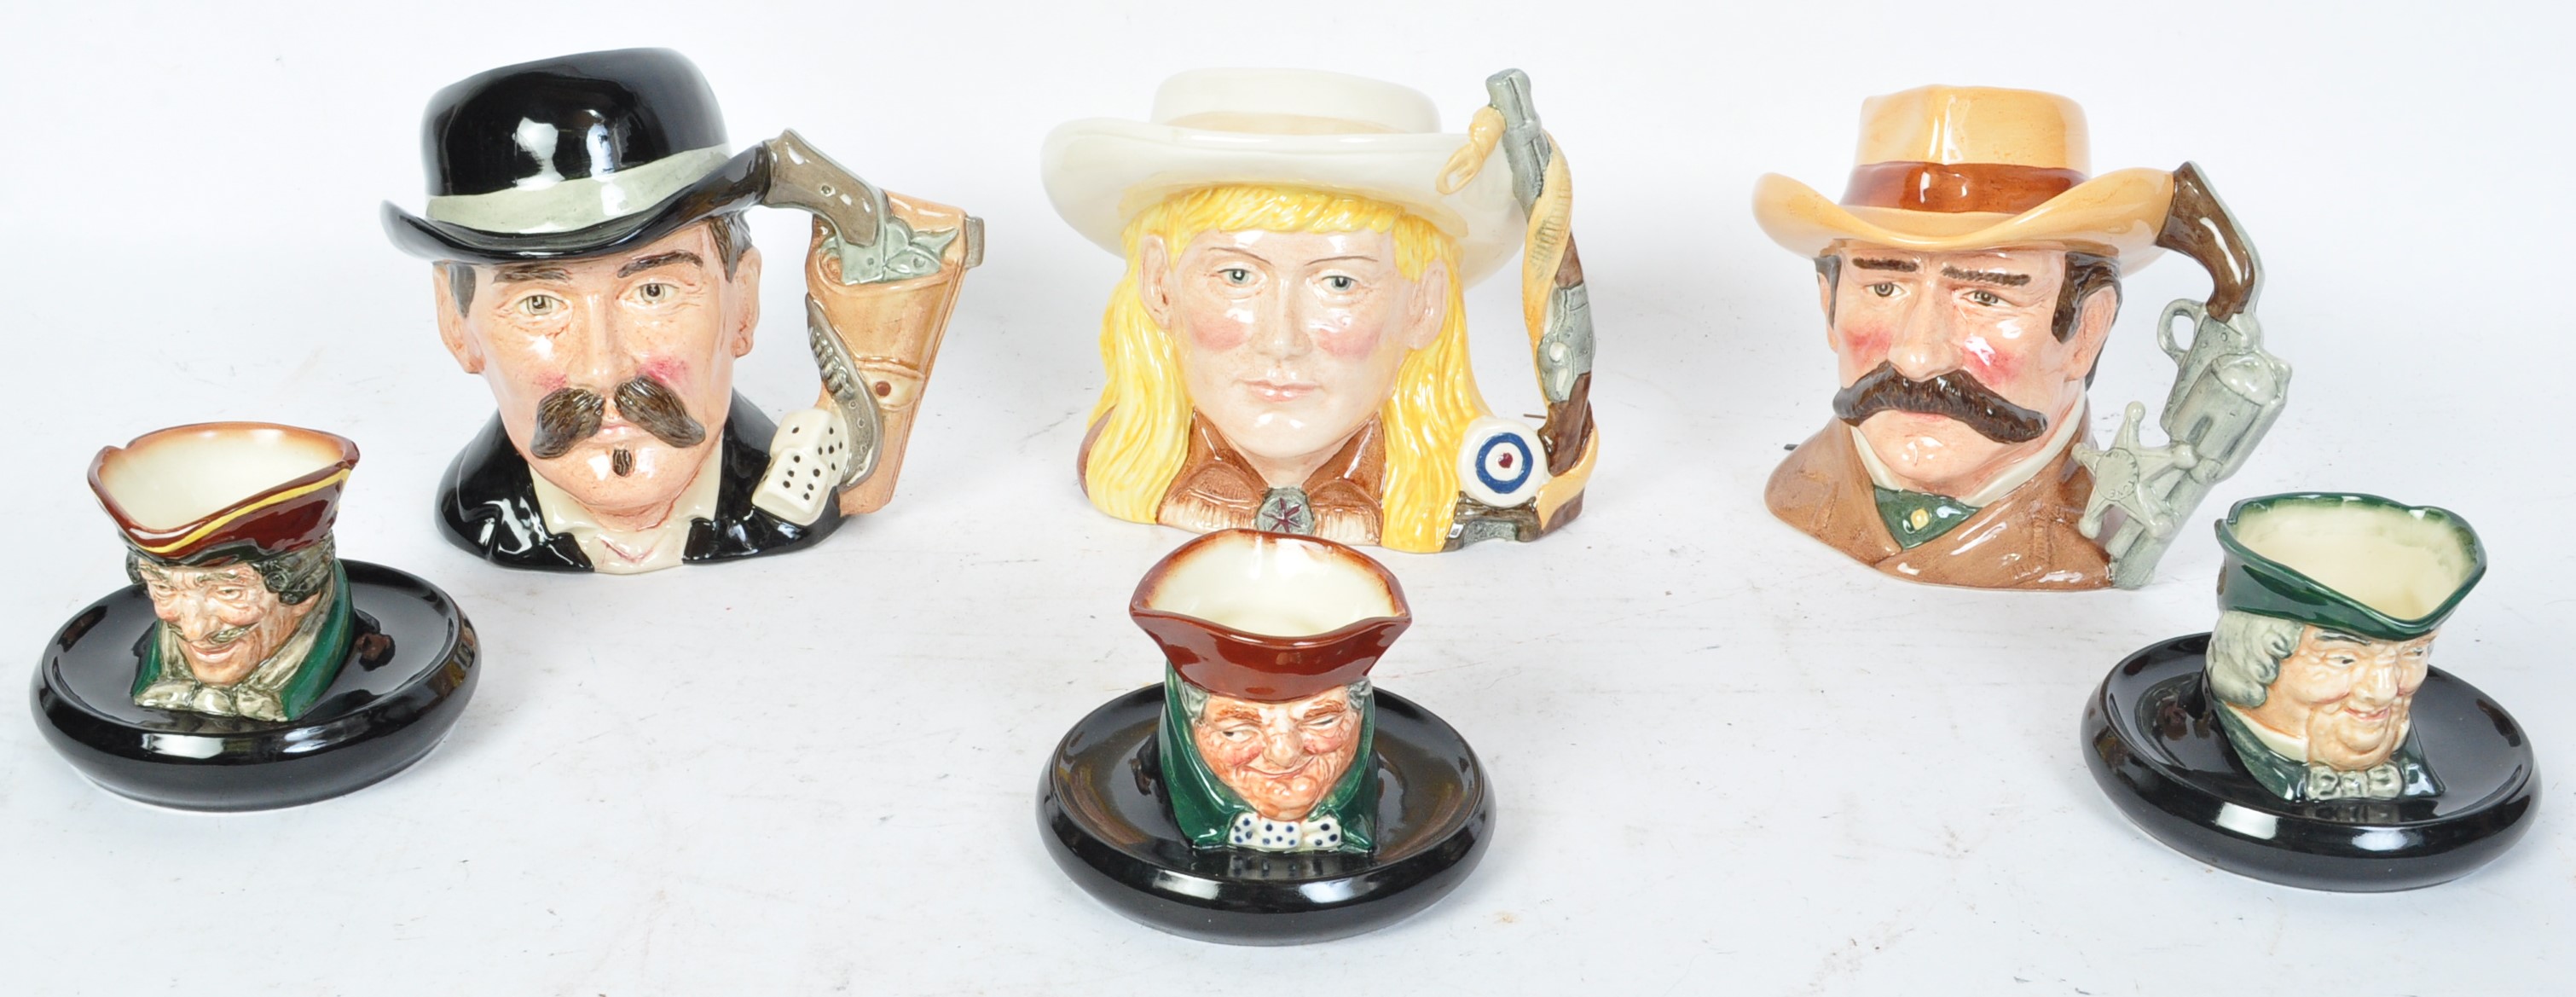 A COLLECTION OF SIX VINTAGE ROYAL DOULTON TOBY JUGS